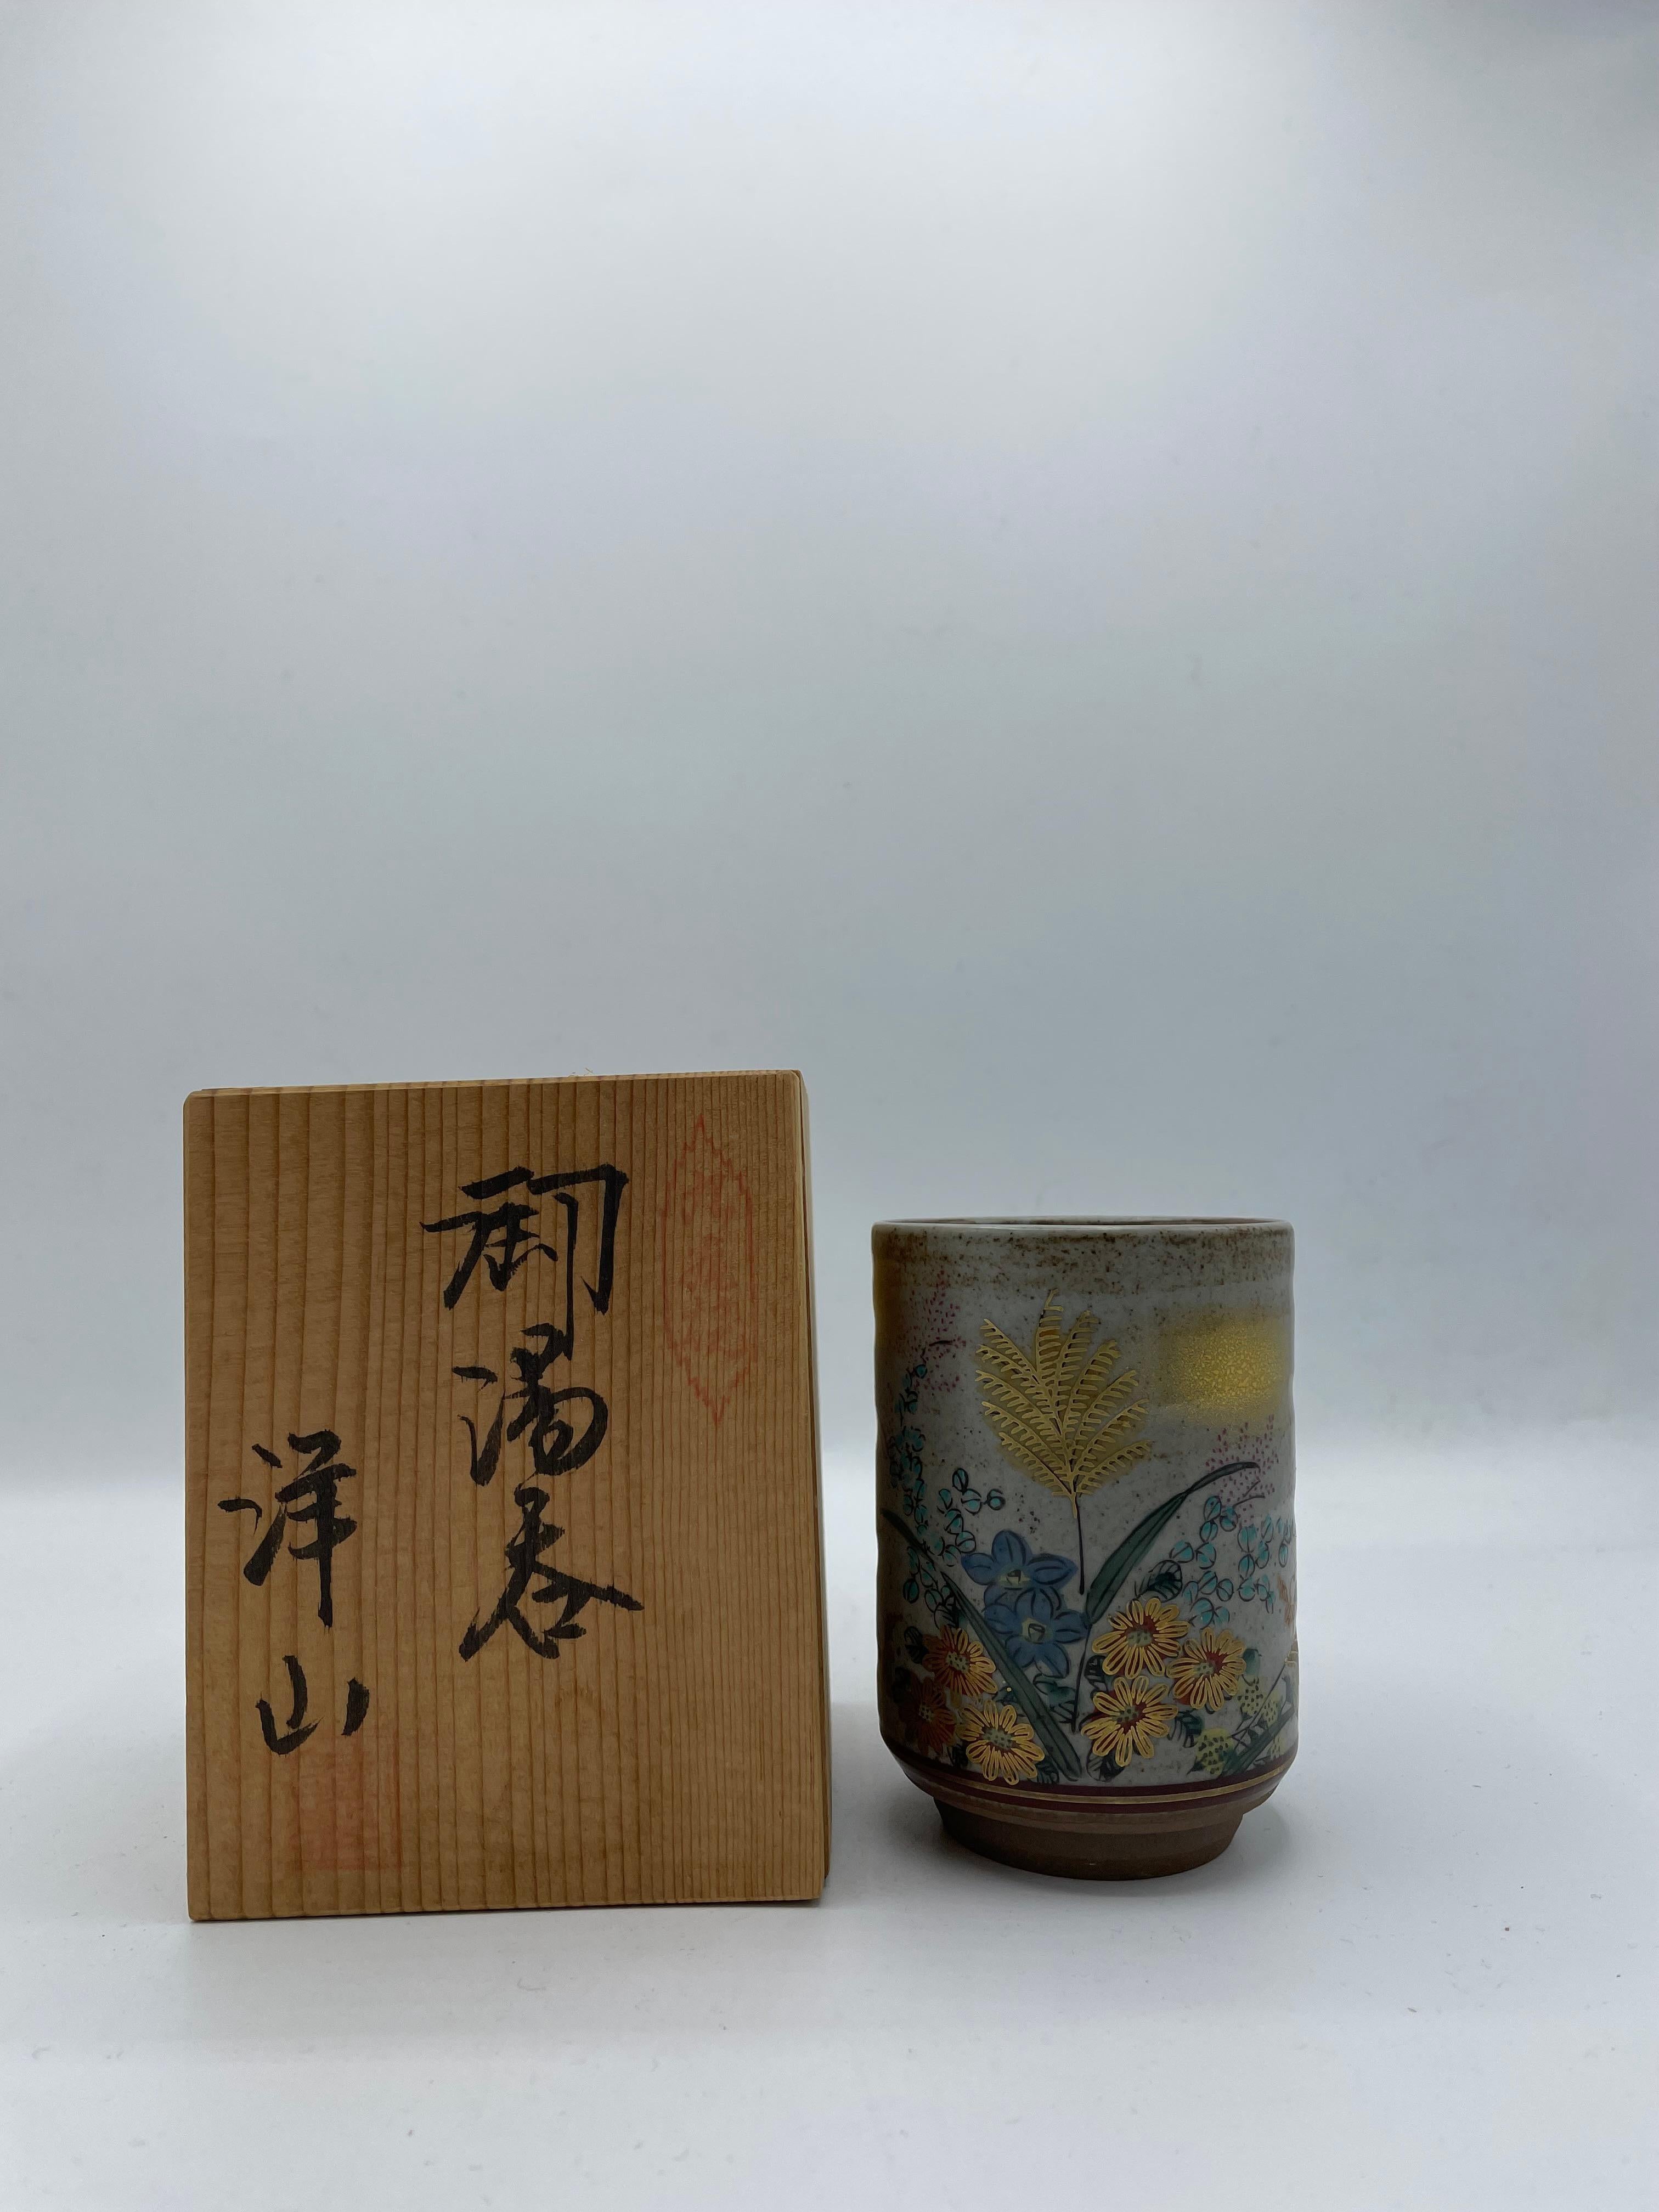 This is a tea cup which was made in Japan around 1950s in Showa era.
It was made with Kutani ware technique. And made by an artist called 'Yozan'.
It will come with a wooden box.

Kutani ware is a style of Japanese porcelain traditionally